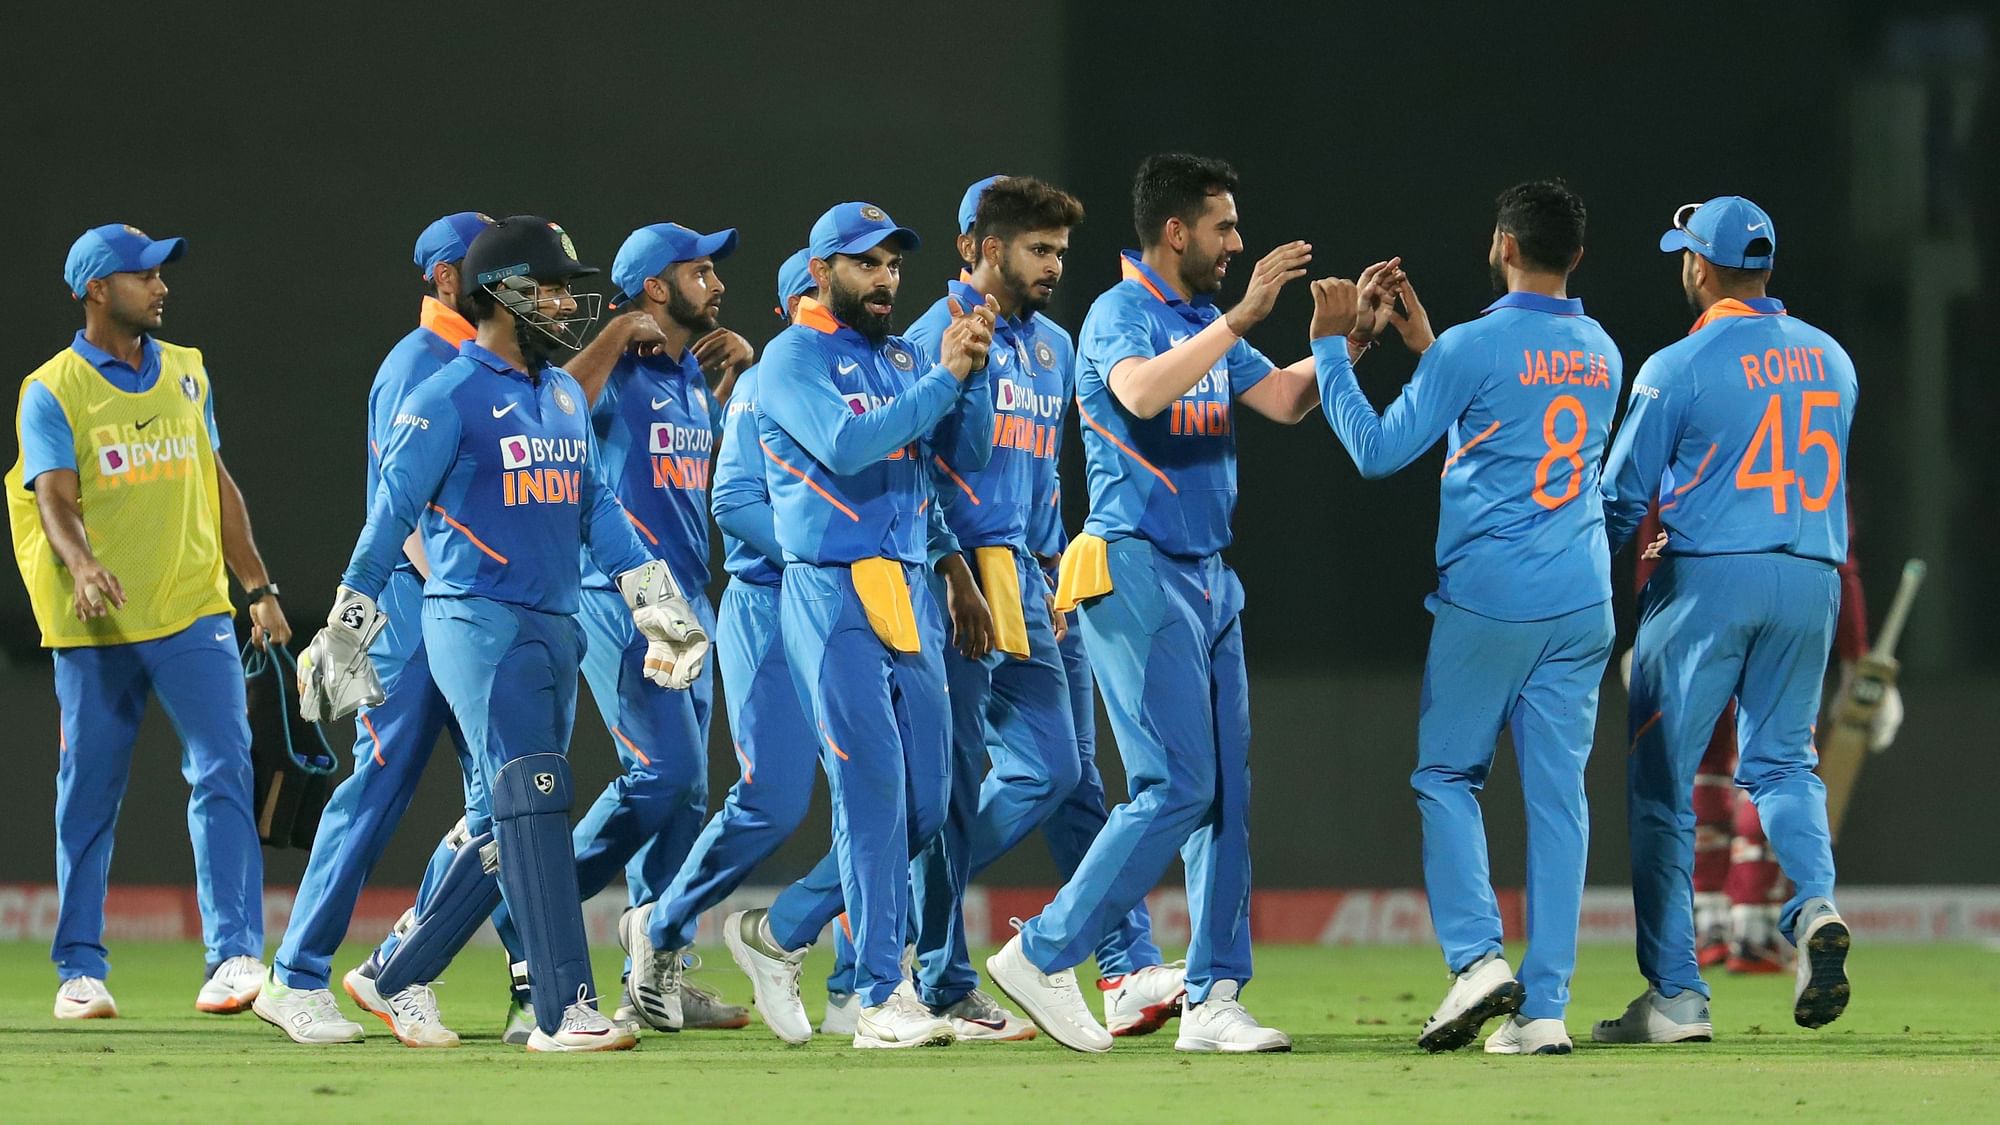 India had lost the first ODI before bouncing back to win the next two matches to complete a 2-1 series win over West Indies.